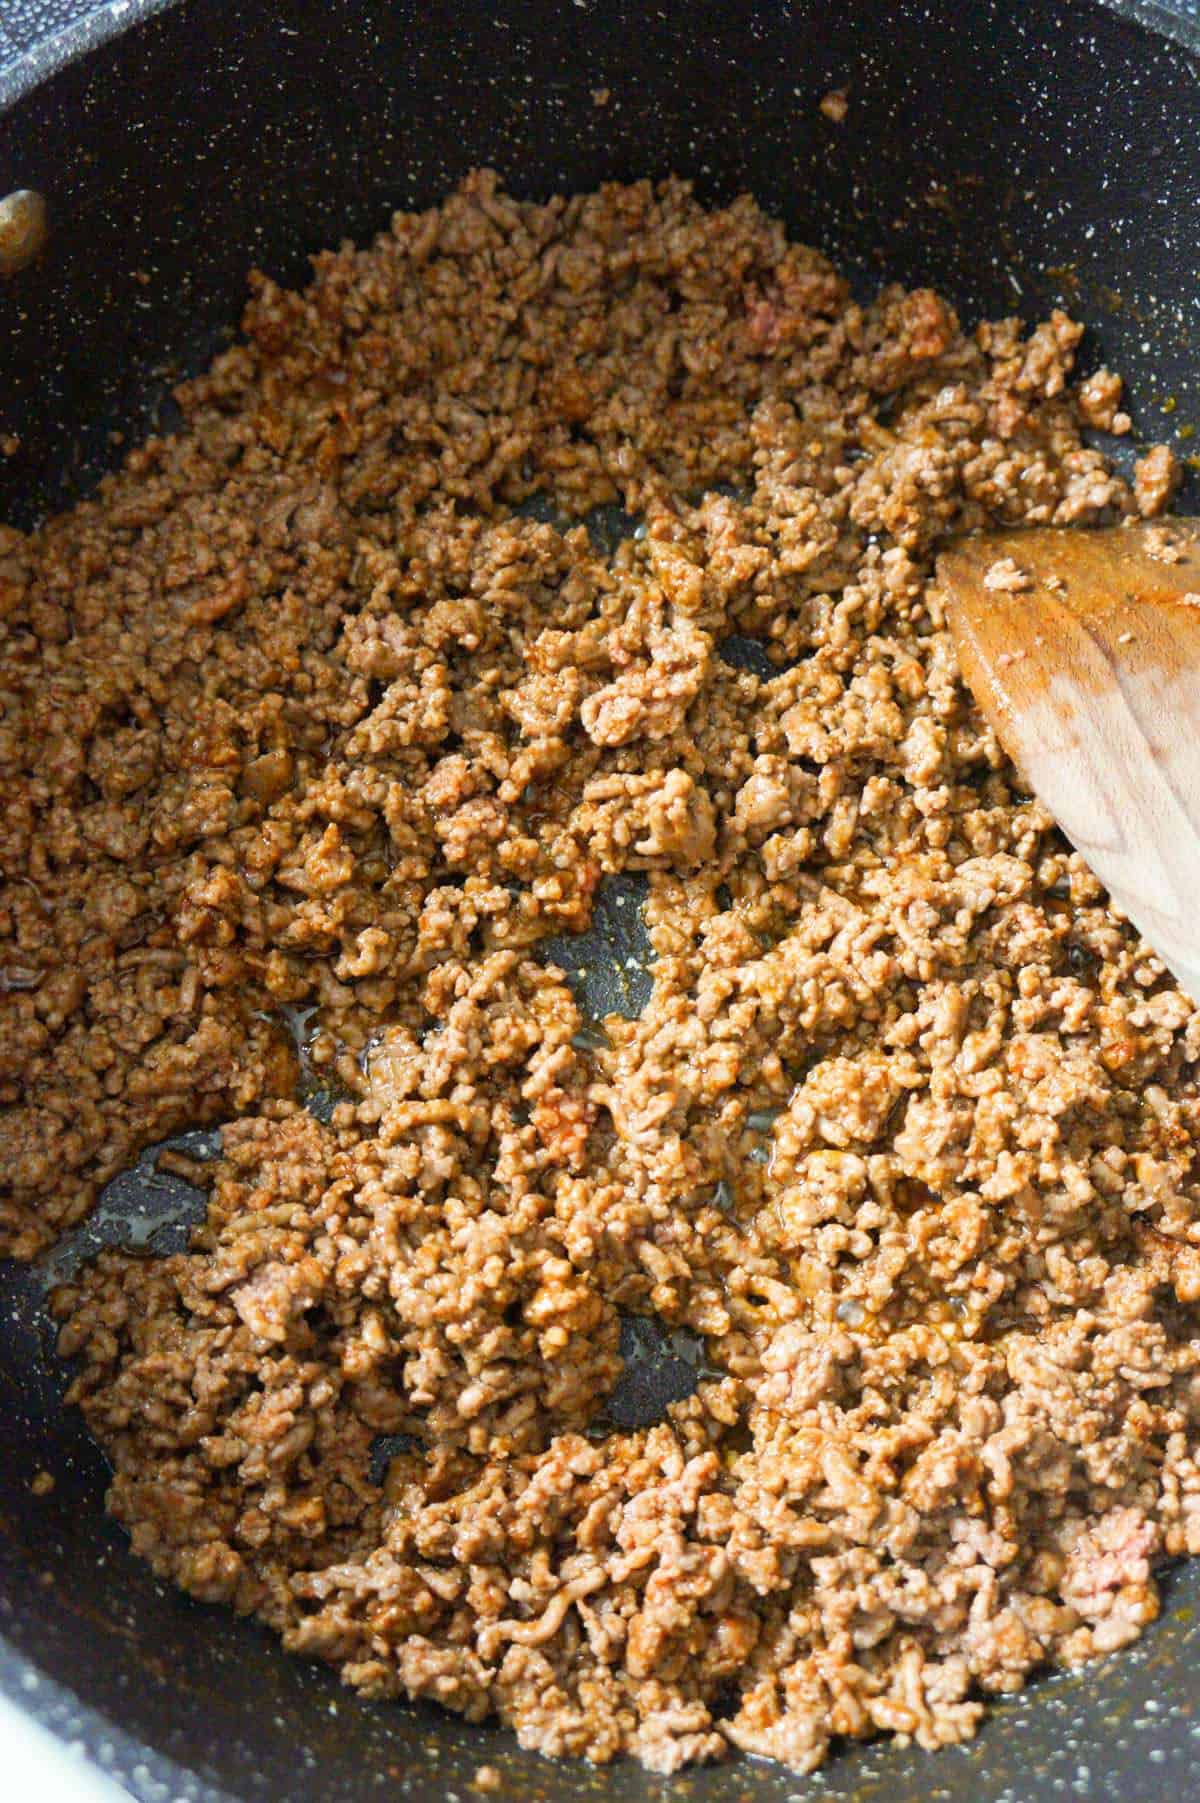 ground beef coated in taco seasoning in a saute pan